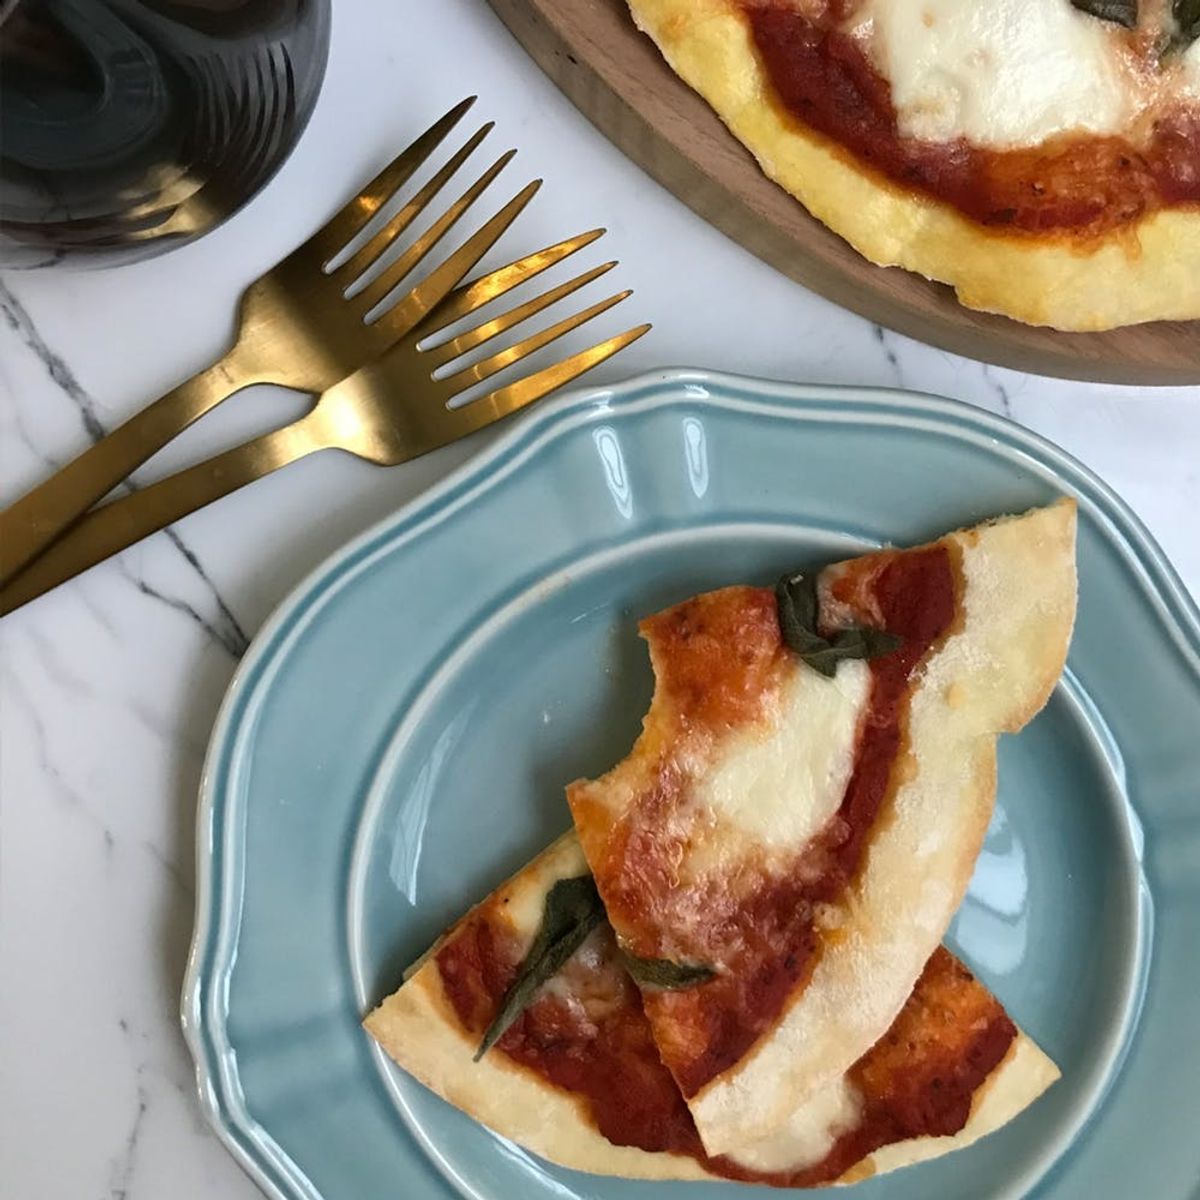 This Homemade Pizza Dough Recipe Just Calls for 2 Simple Ingredients